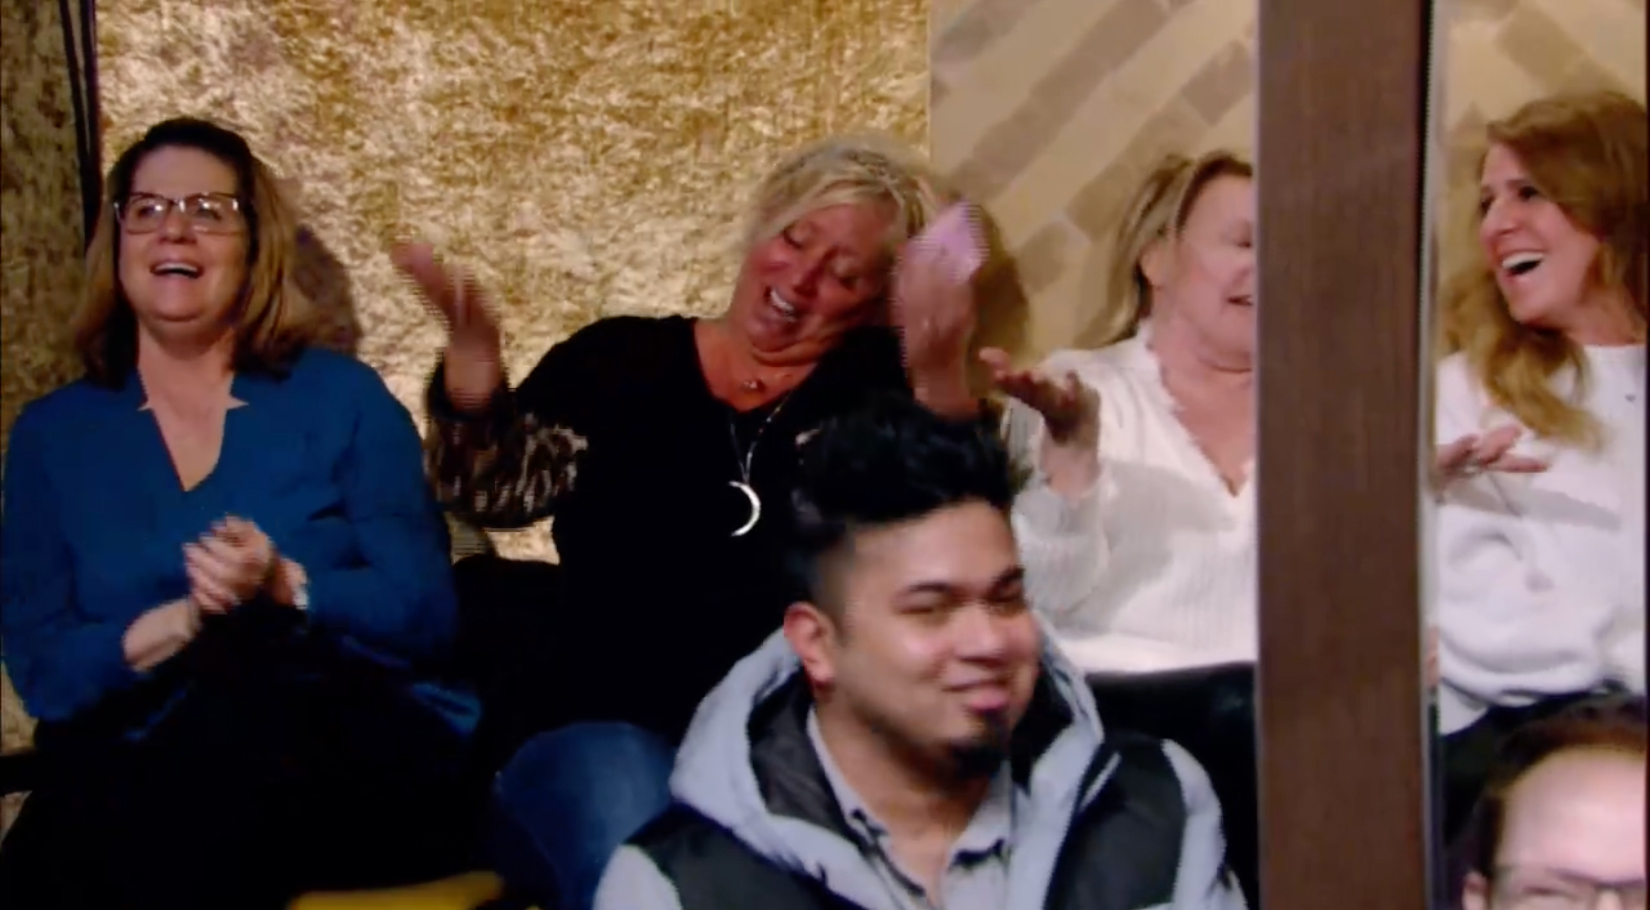 A woman who was the lucky winner was sitting behind a pole in the studio